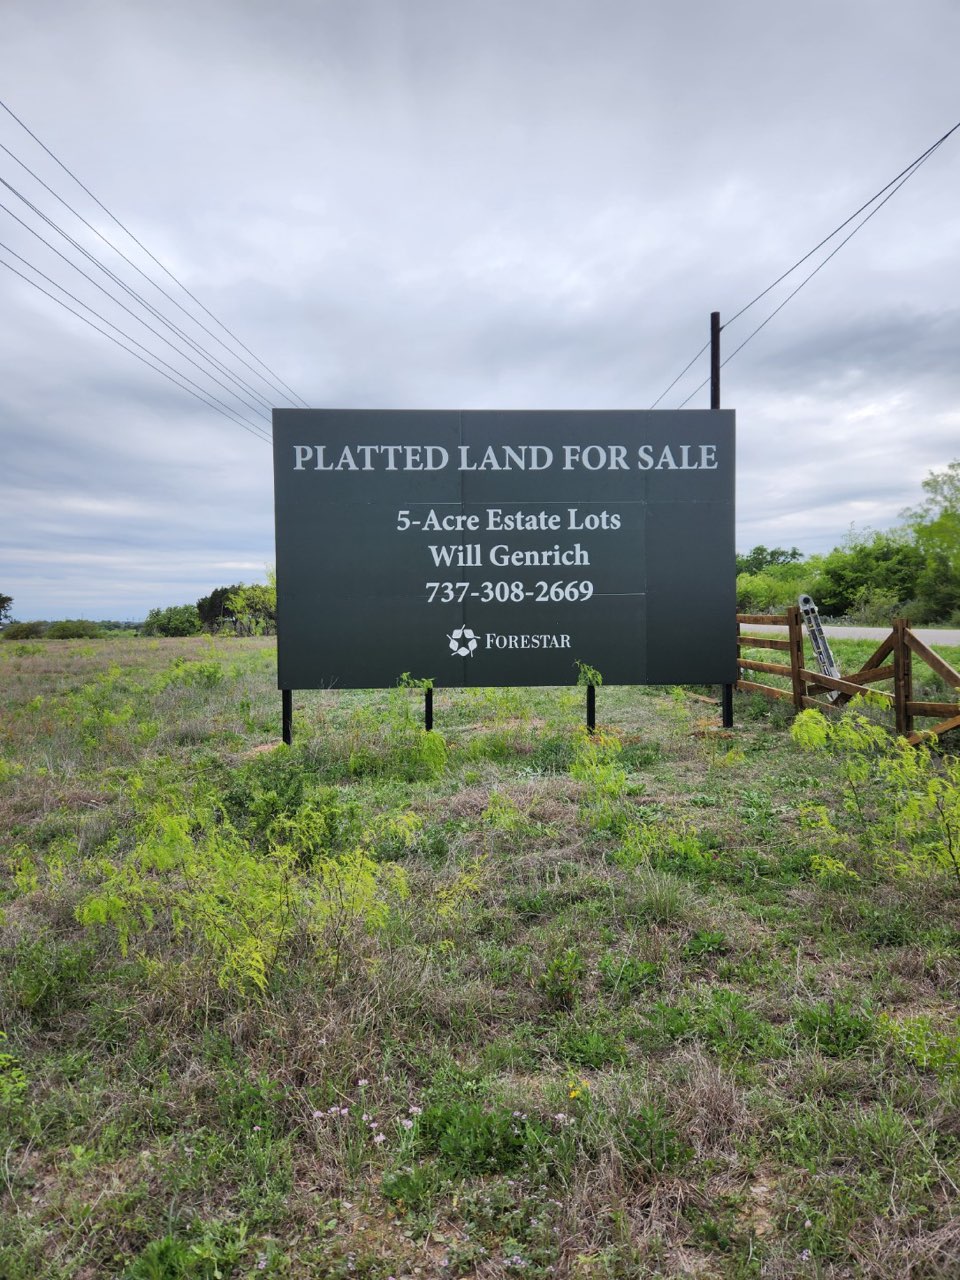 site-signs-land-for-sale